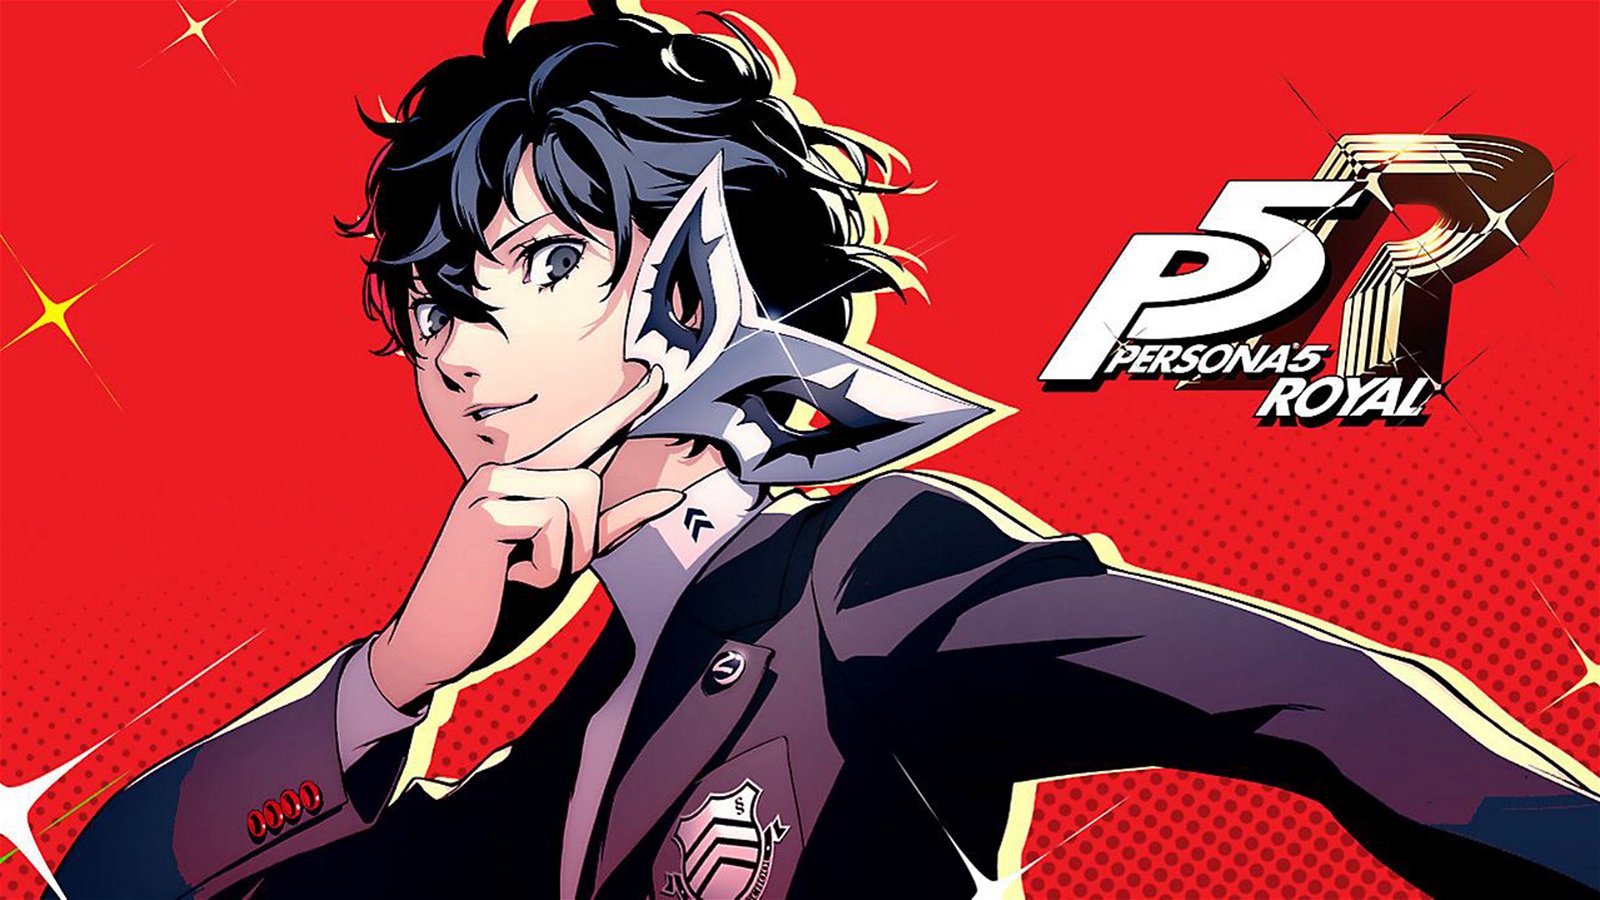 Persona 5 Royal Review – Taking Your Heart For Good This Time